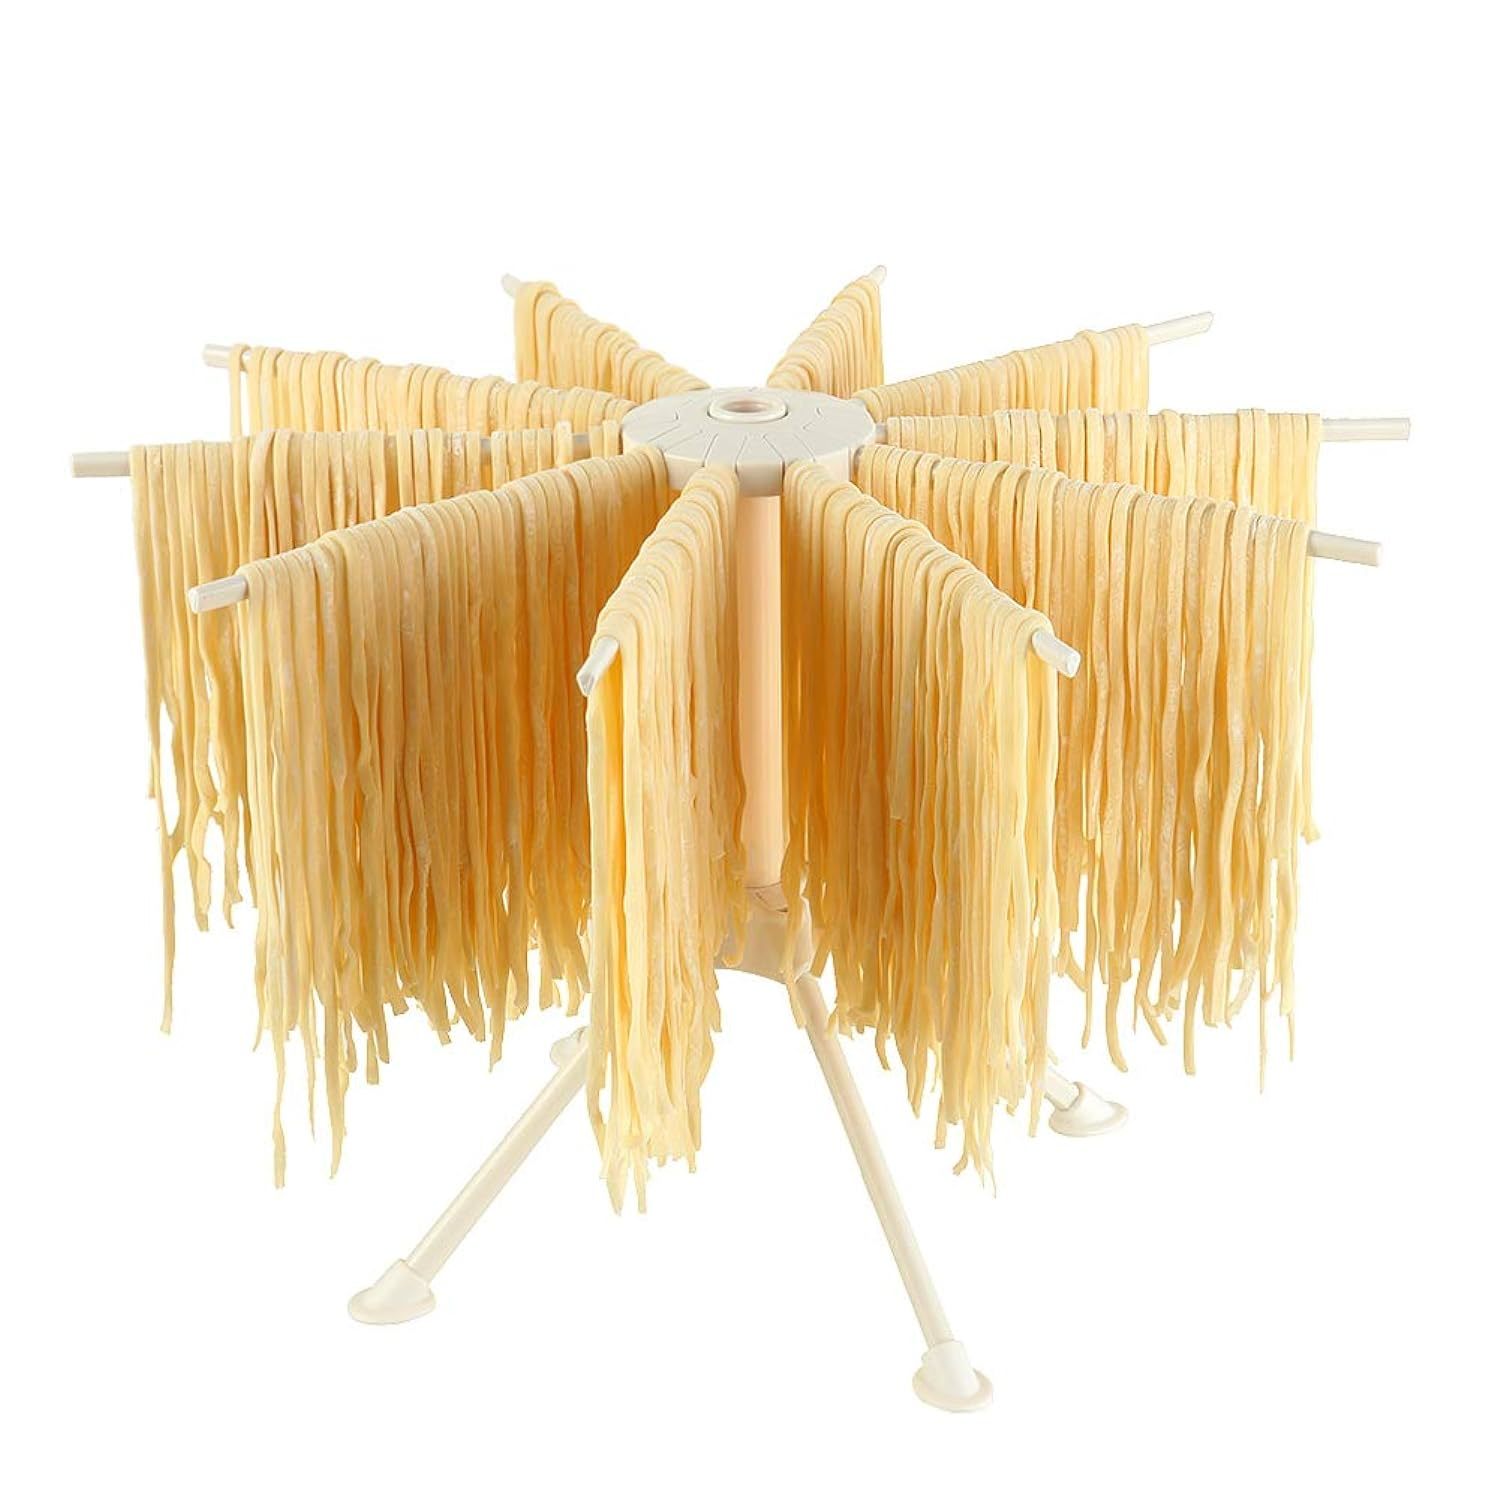 Primary image for Collapsible Pasta Drying Rack, Plastic Foldable Homemade Fresh Spaghetti Stand D